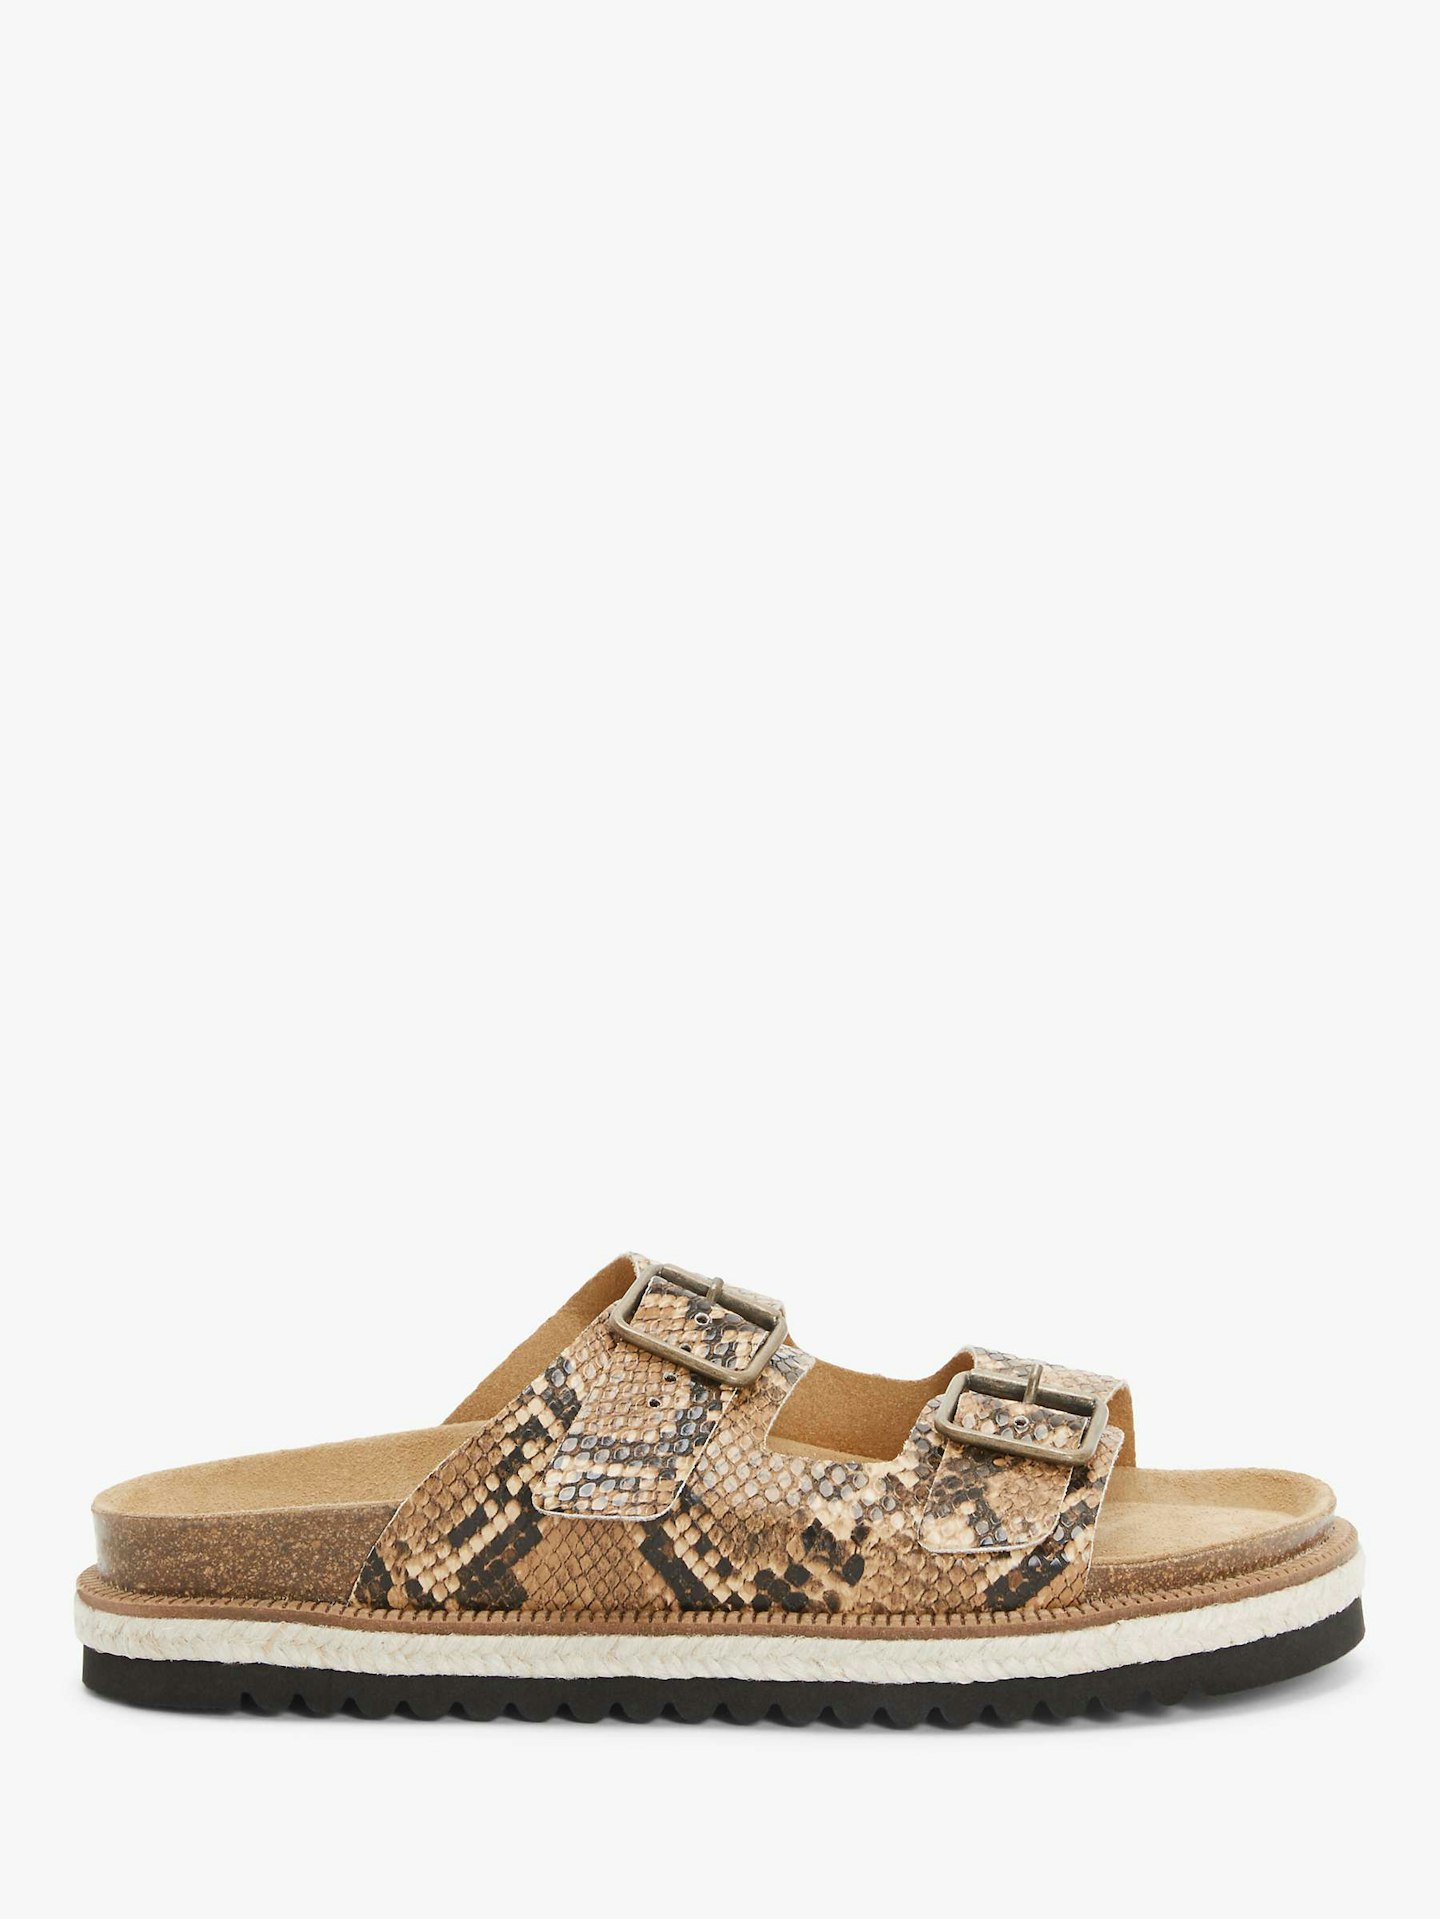 AND/OR, Snake Sandals,  £65